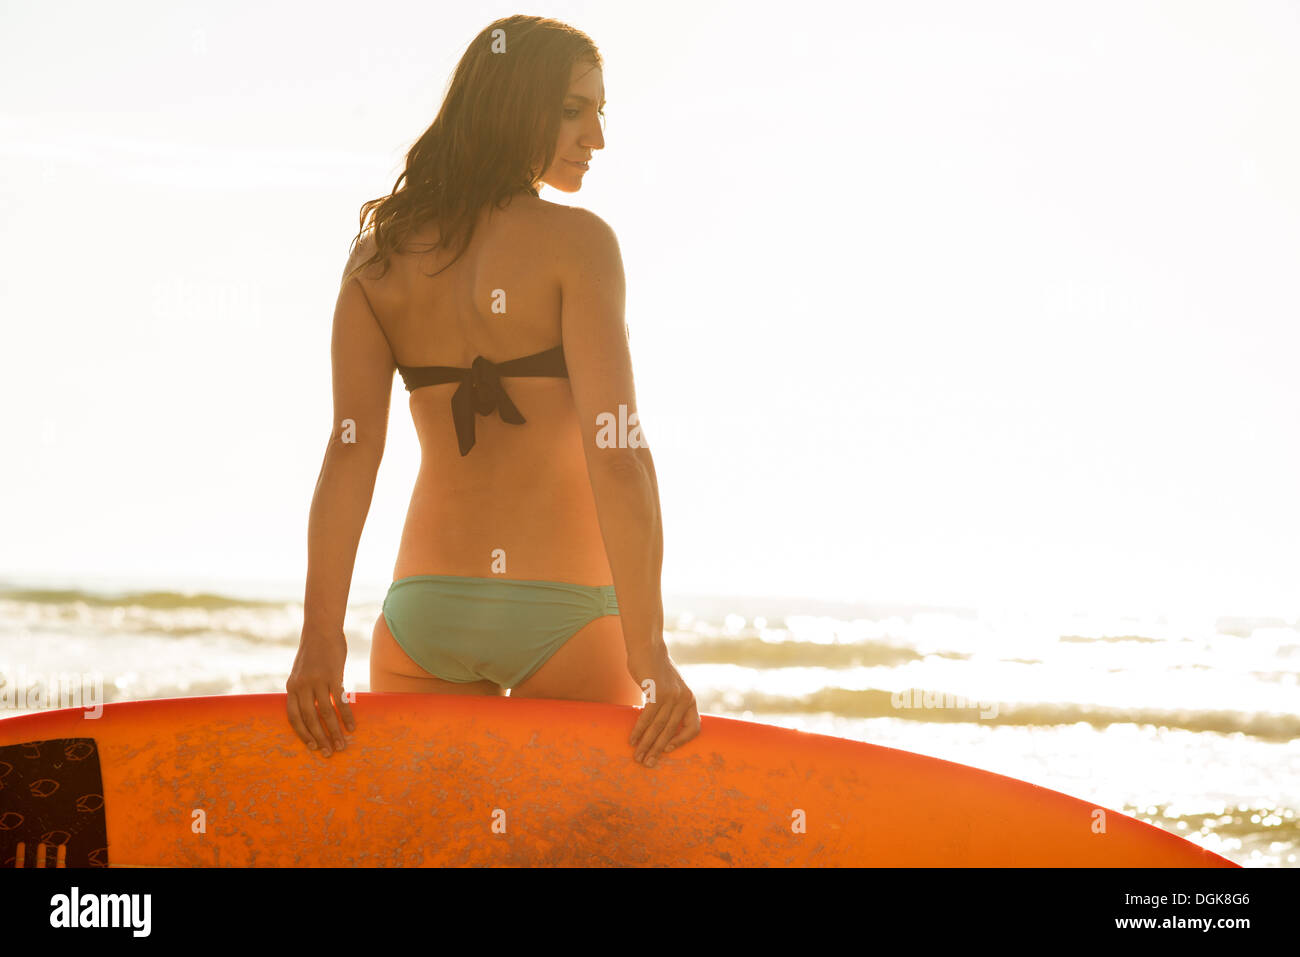 Young woman holding surfboard, La Jolla, San Diego, California, USA Banque D'Images